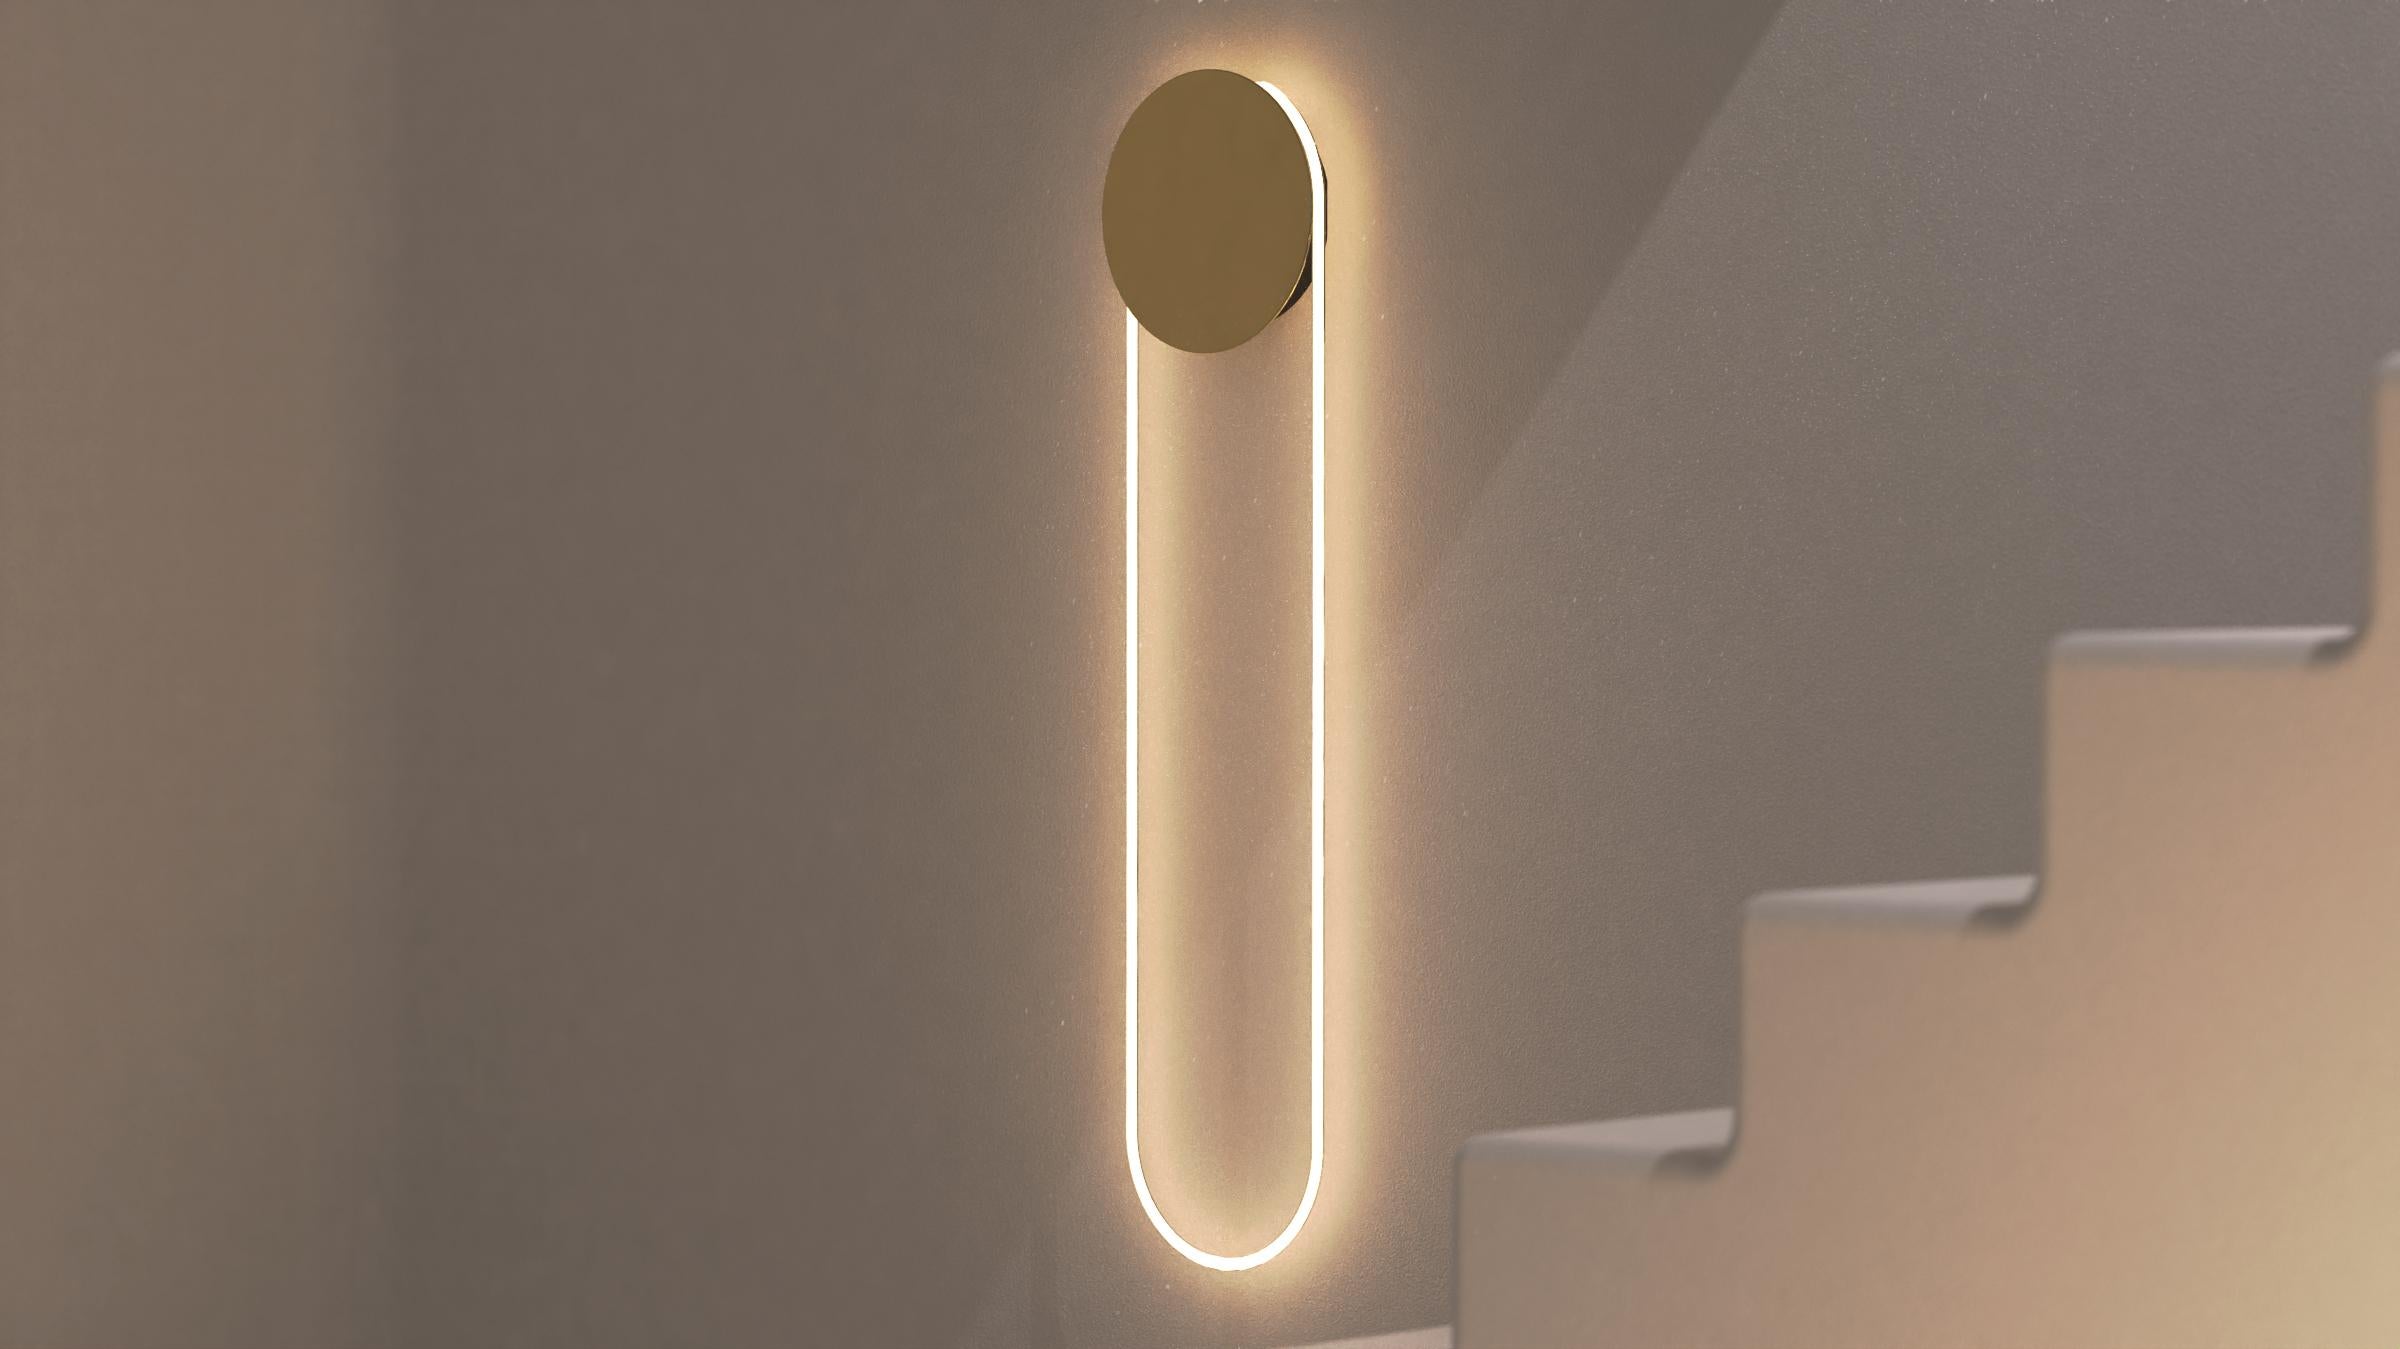 Ra Wall Mirror Modern Hand Bent Neon Wall Sconce Lighting by Studio d'armes For Sale 2